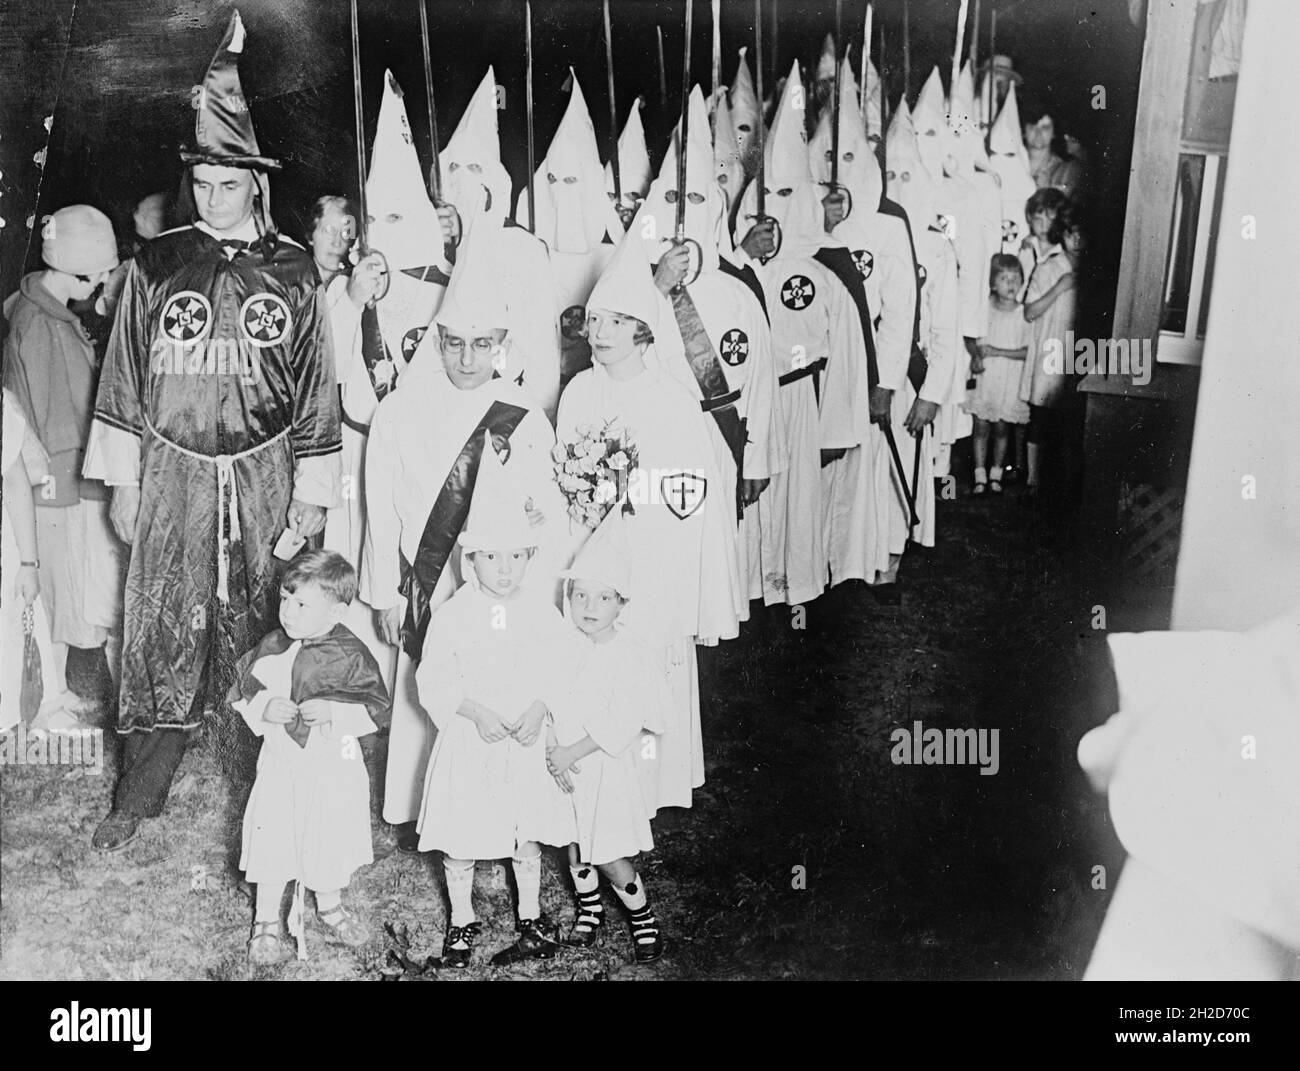 Vintage photo circa 1924 showing members of the Ku Klux Klan attending a wedding with small children dressed in klan robes and hoods Stock Photo